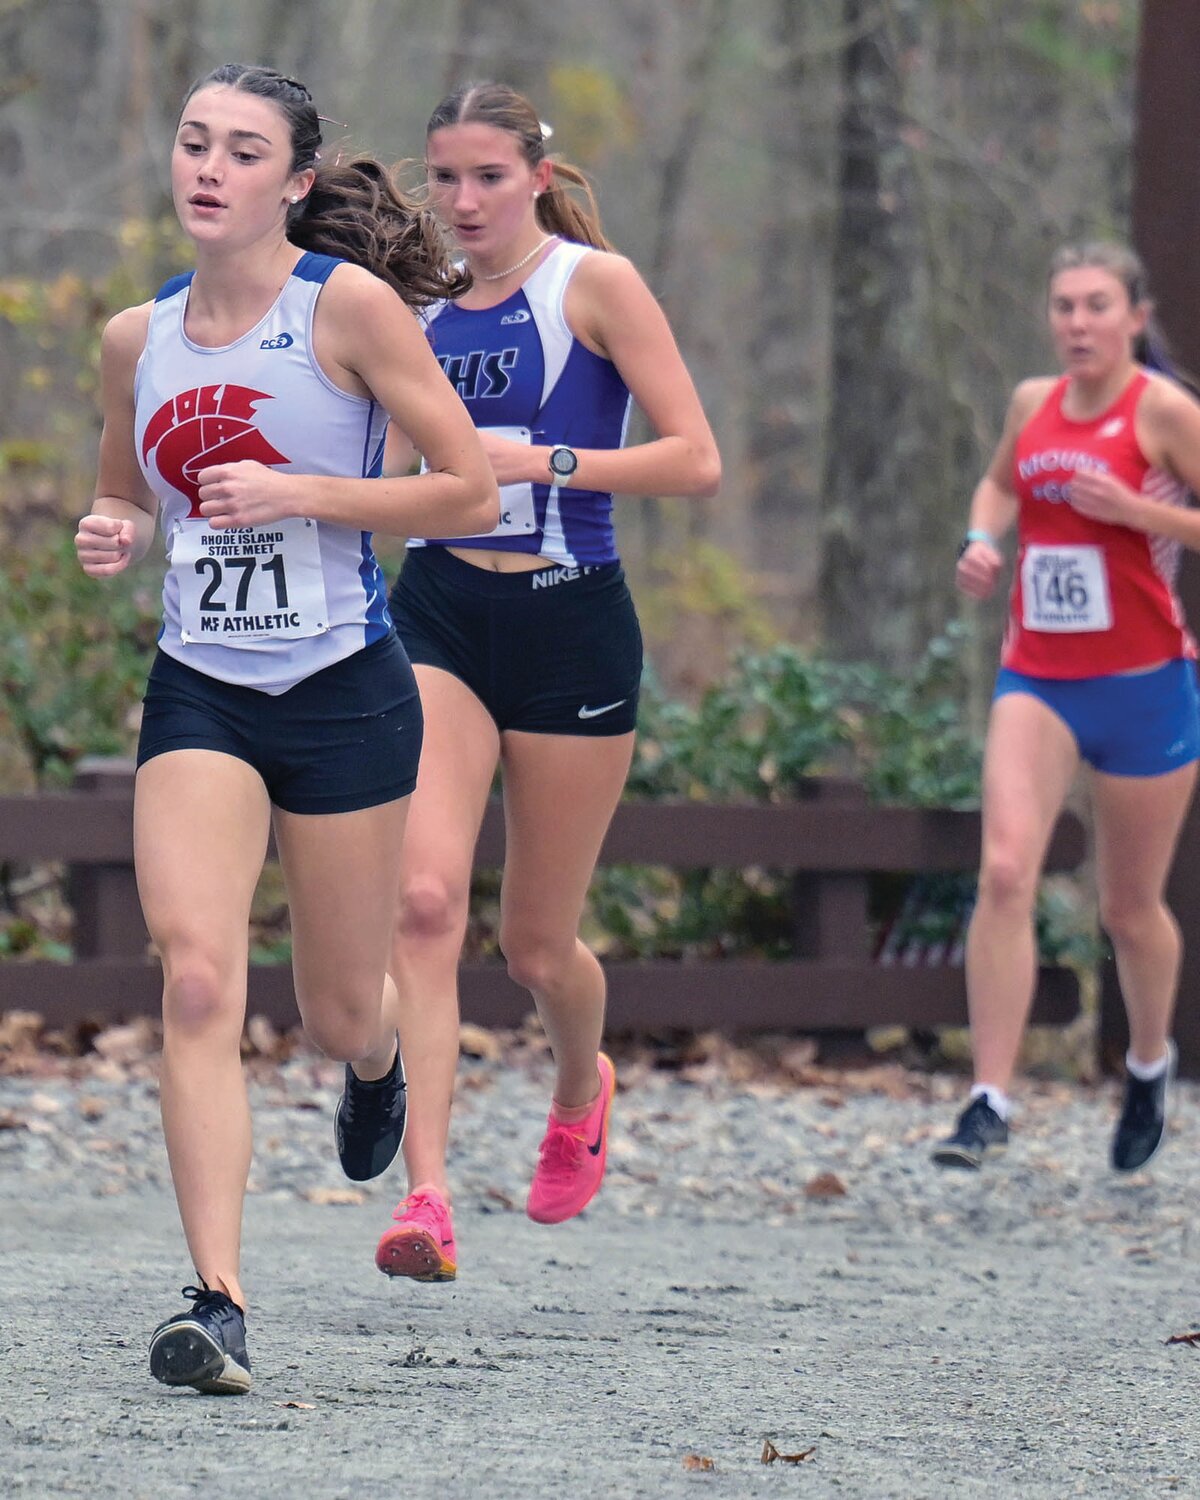 TOP 10: Toll Gate’s Alison Pankowicz, who finished in ninth place overall.